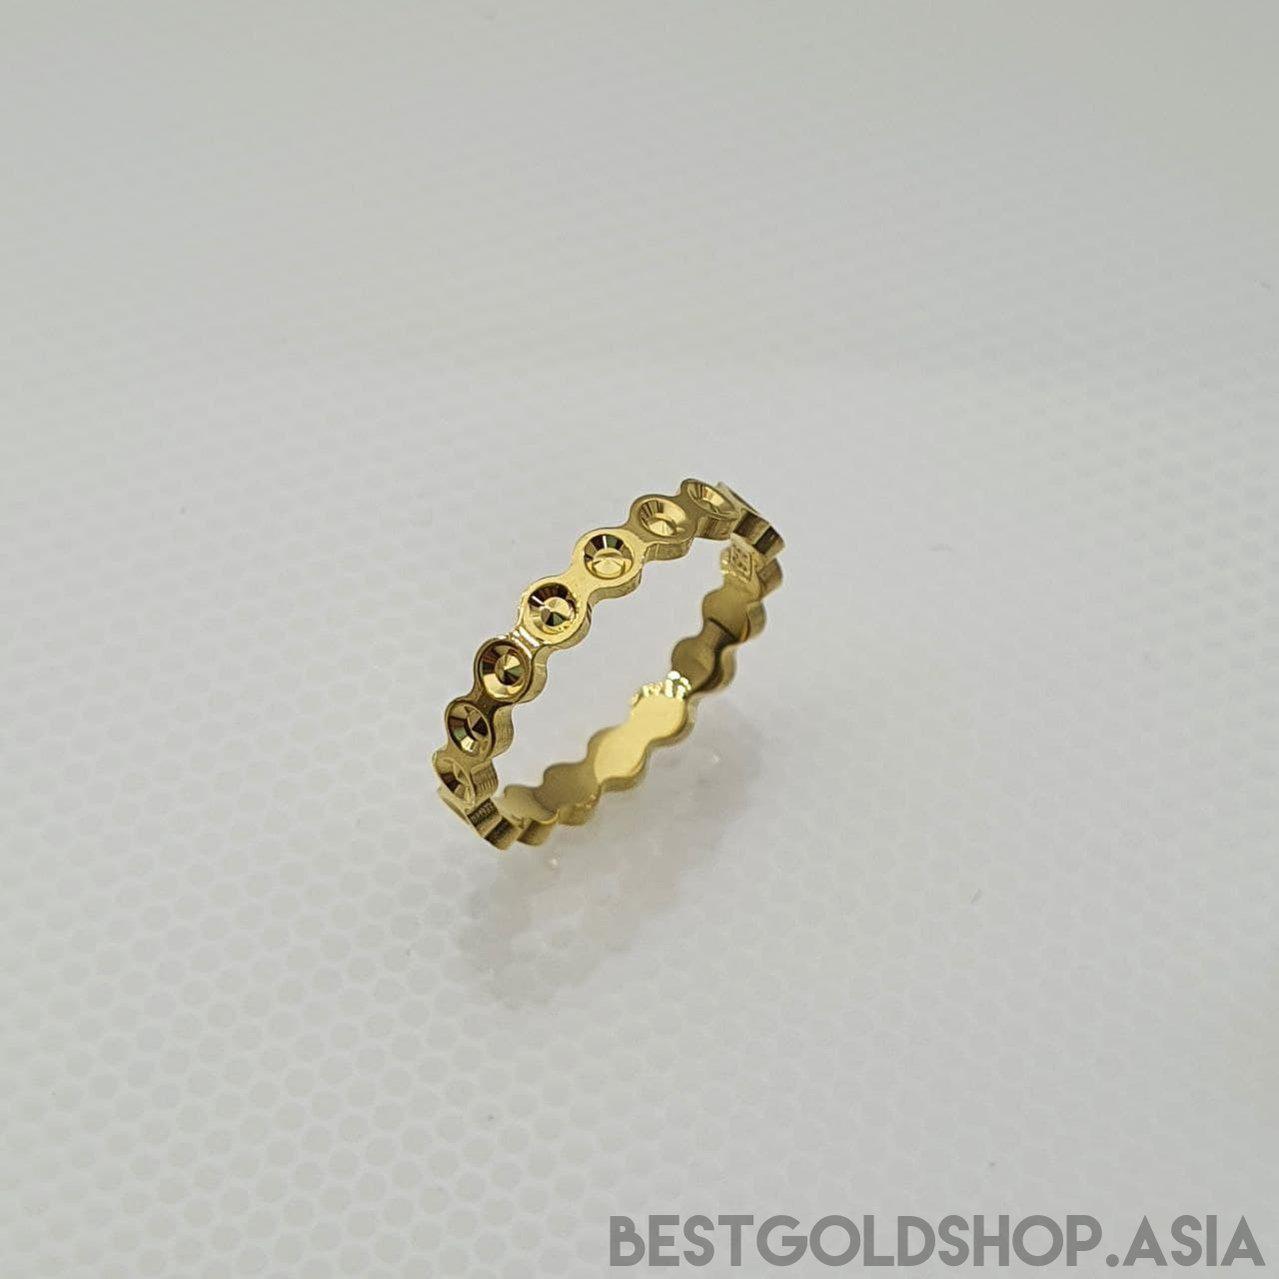 22k / 916 Gold Pinky Ring Smooth finish V1-916 gold-Best Gold Shop